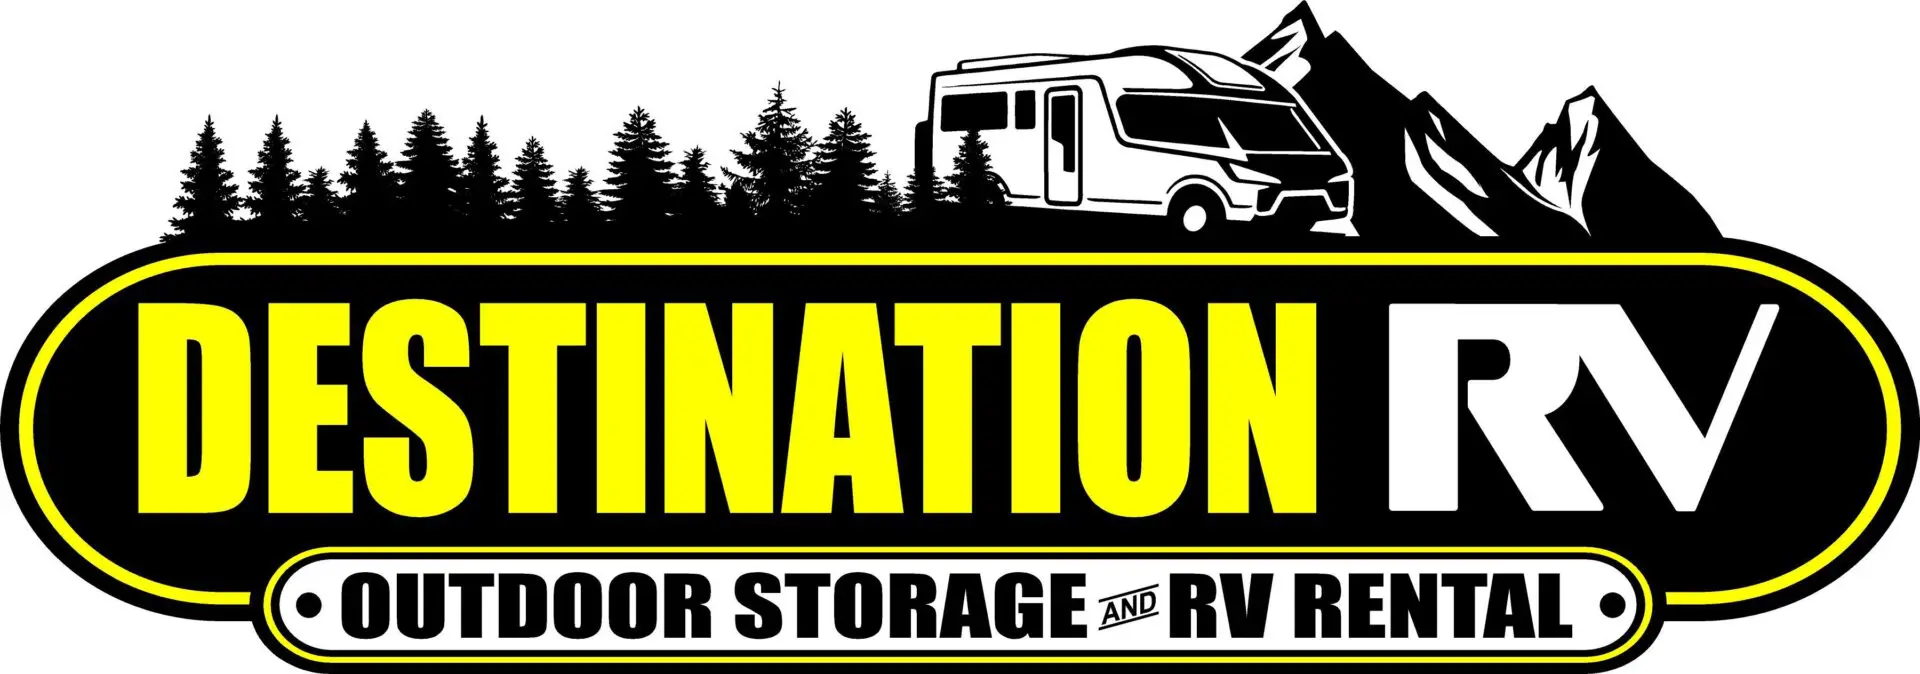 A yellow and black logo for destination rv.